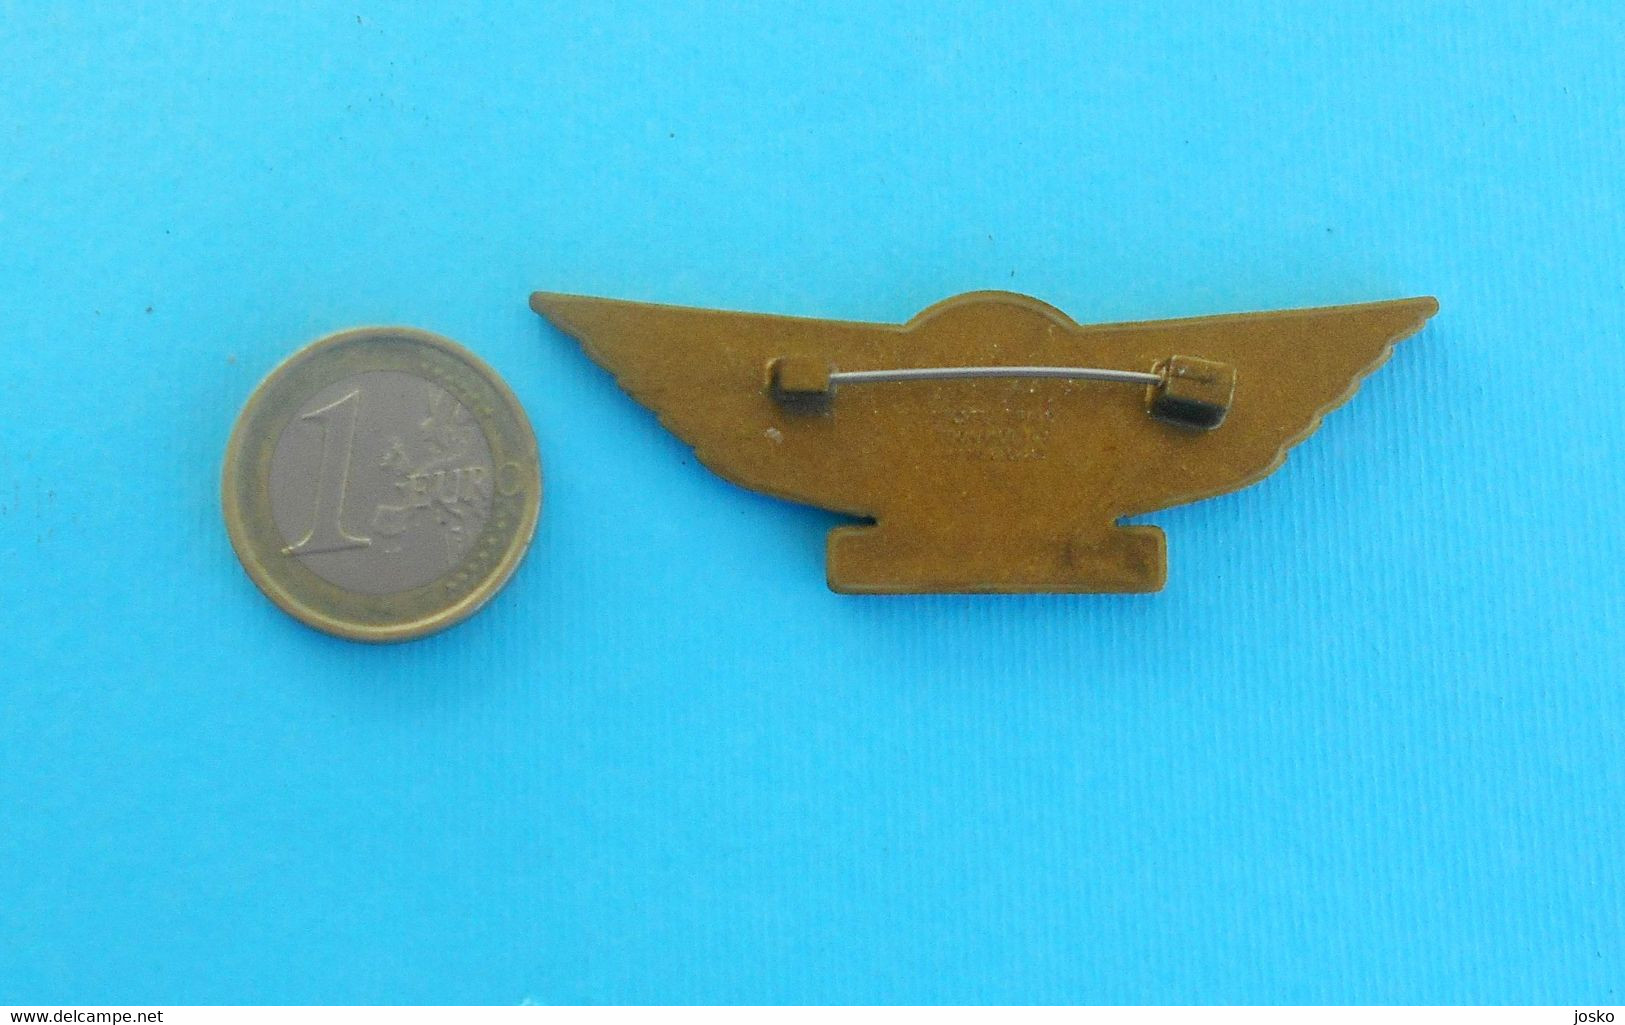 AIR CANADA ... Vintage Pilot Wings Badge * Canada National Airlines * Airways Airline Air Company Pilote Plane Avion - Badges D'équipage